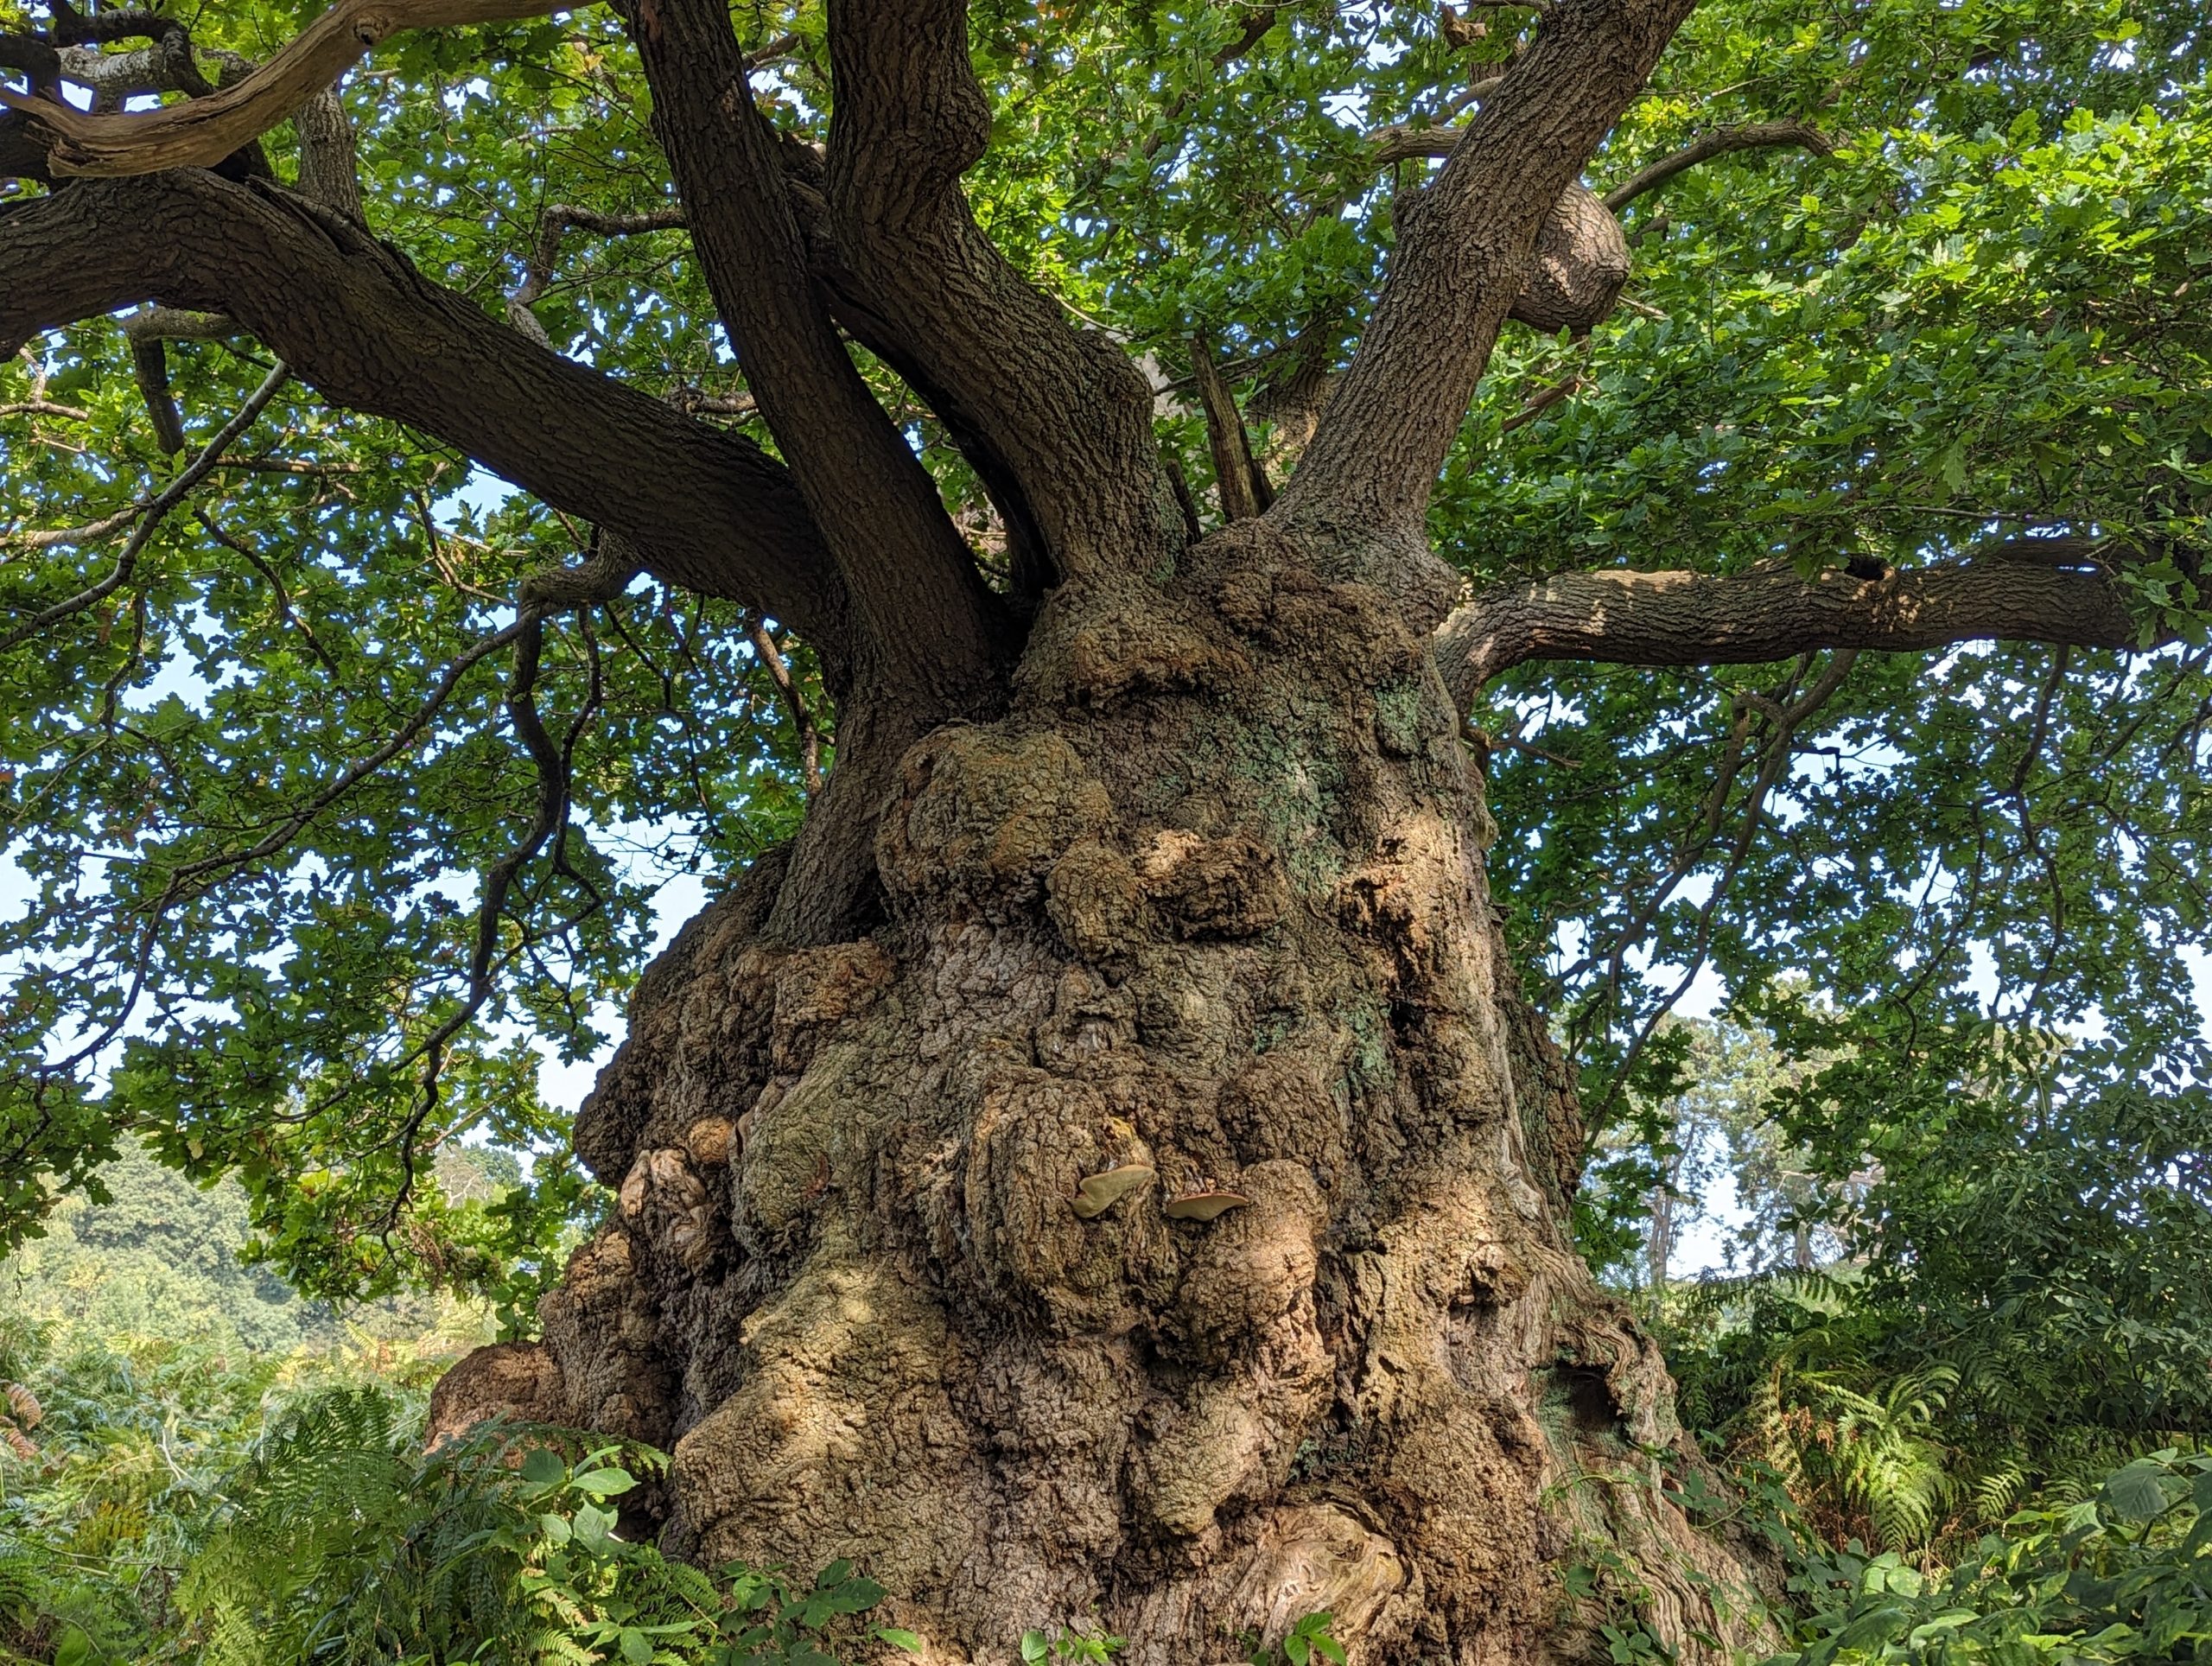 A very old and gnarly oak tree